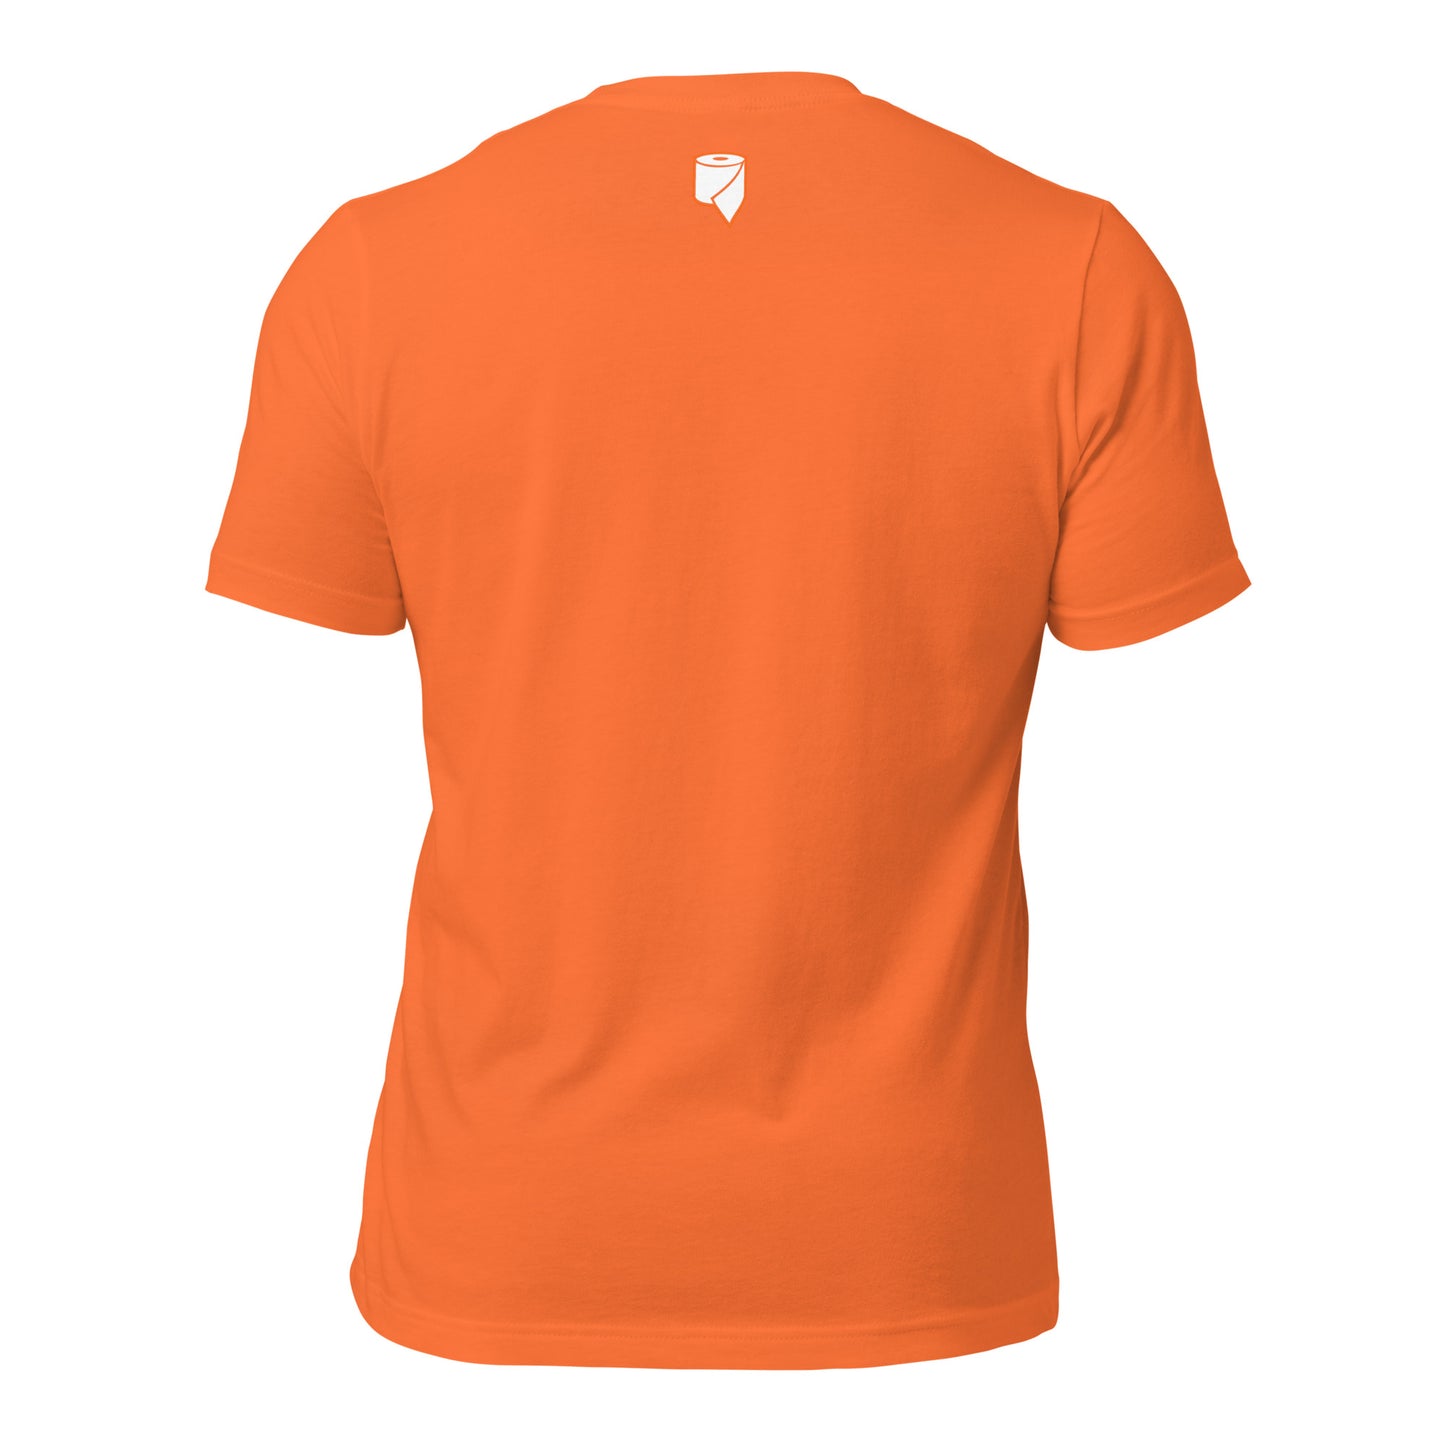 Orange T-shirt - Rolling in Tradition State Logo